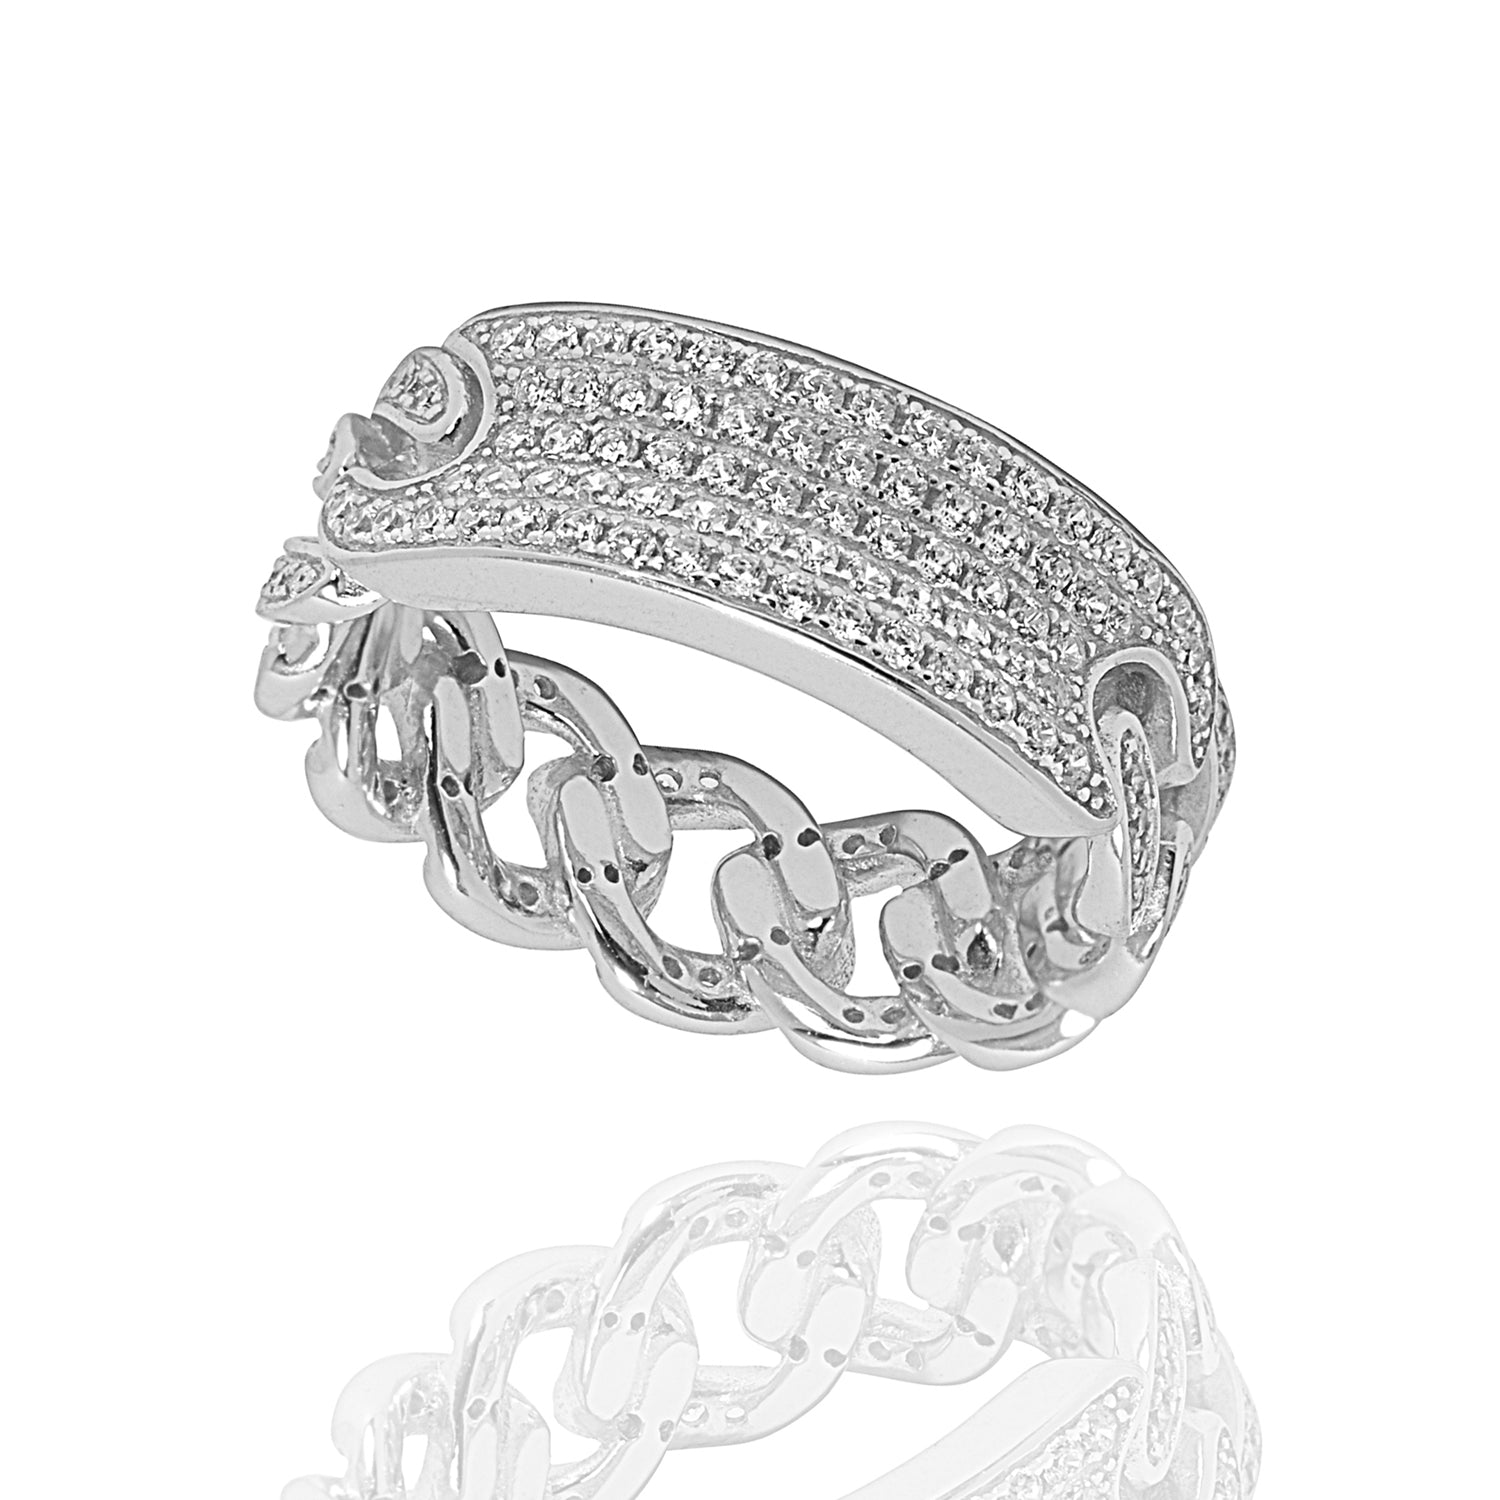 Mila 18k White Gold Plated Infinity Chain Link Ring - Silver